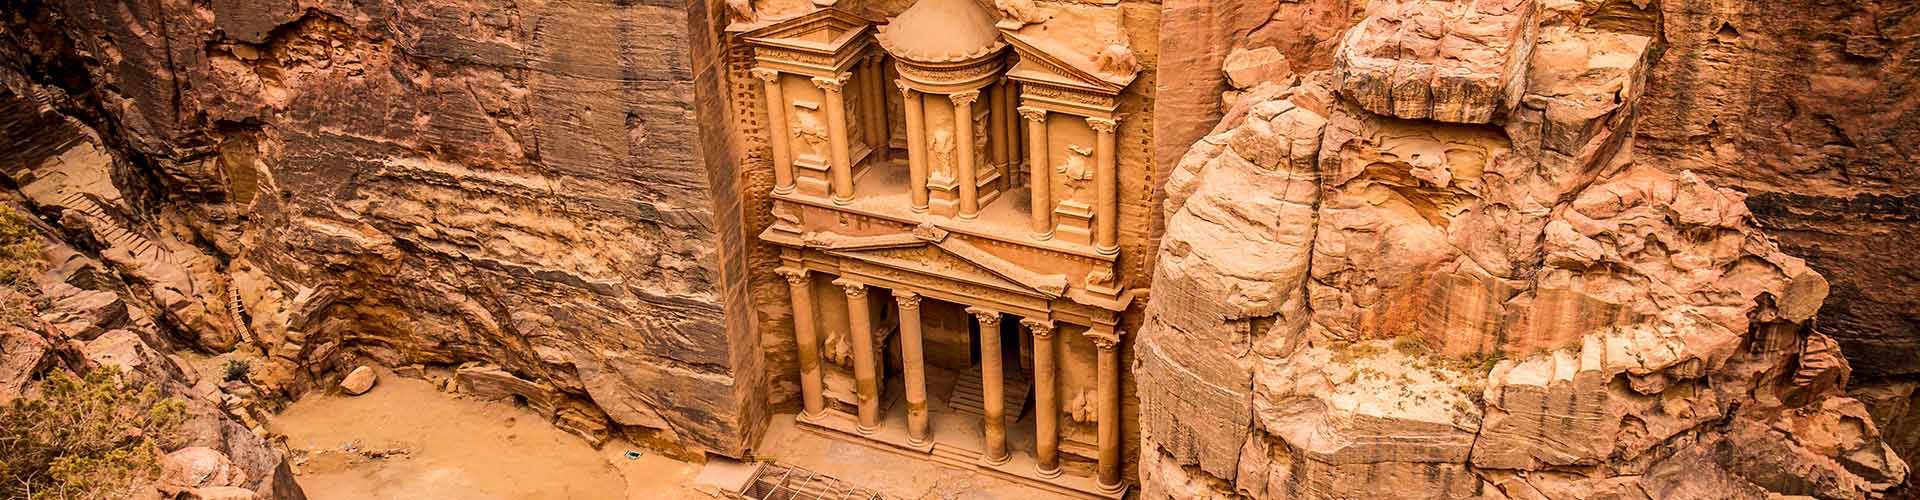 escorted tours to jordan from uk